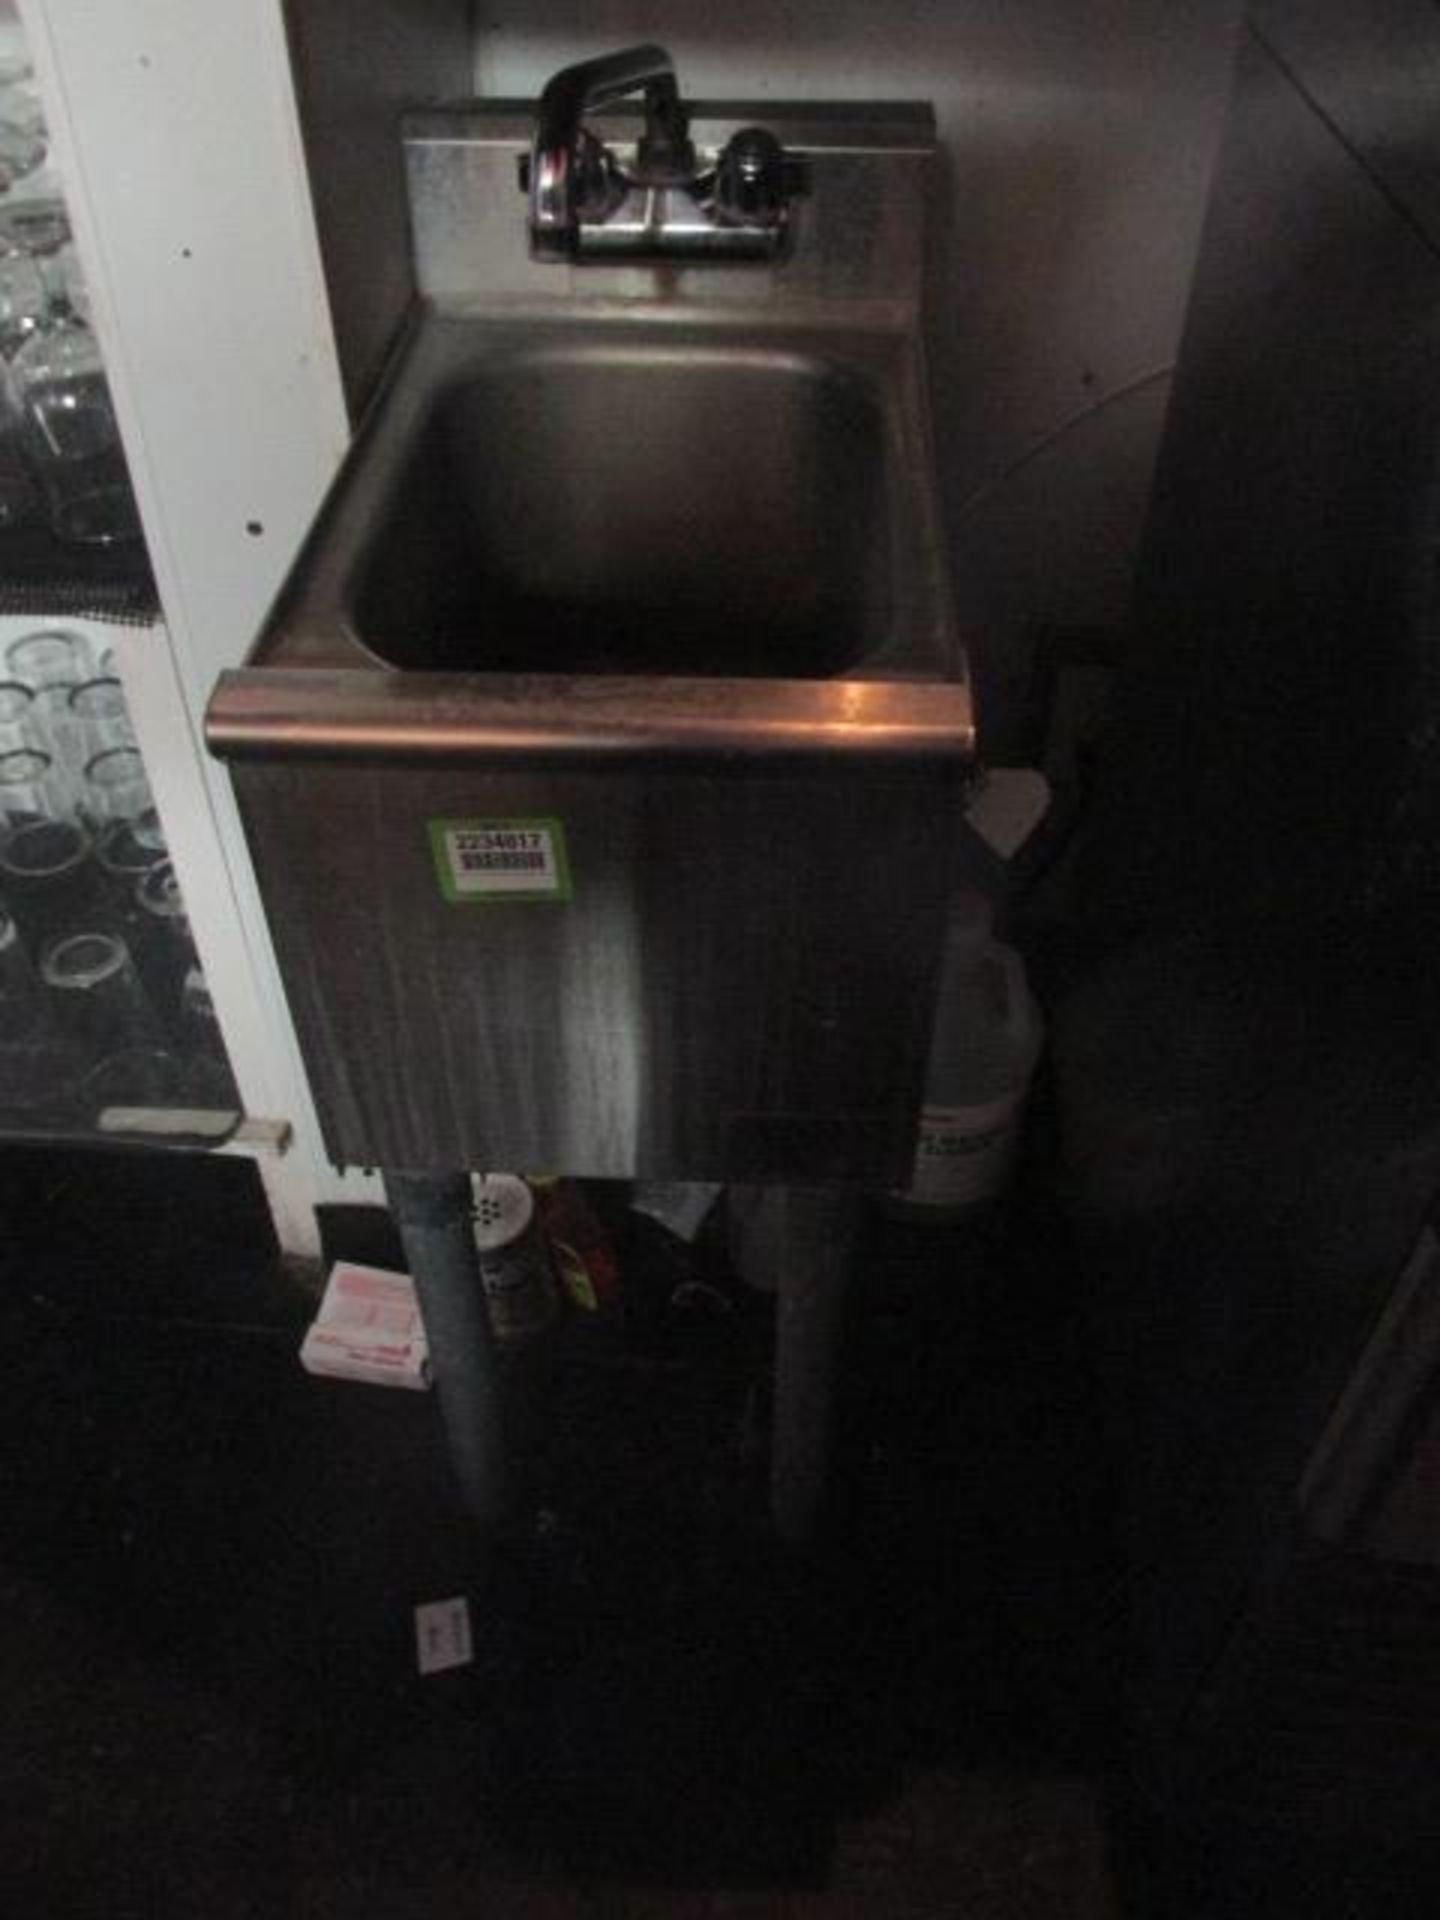 Regency Wall Mounted Wash Sink, 12" X 20". HIT# 2234817. Loc: Behind Bar. Asset Located at 143